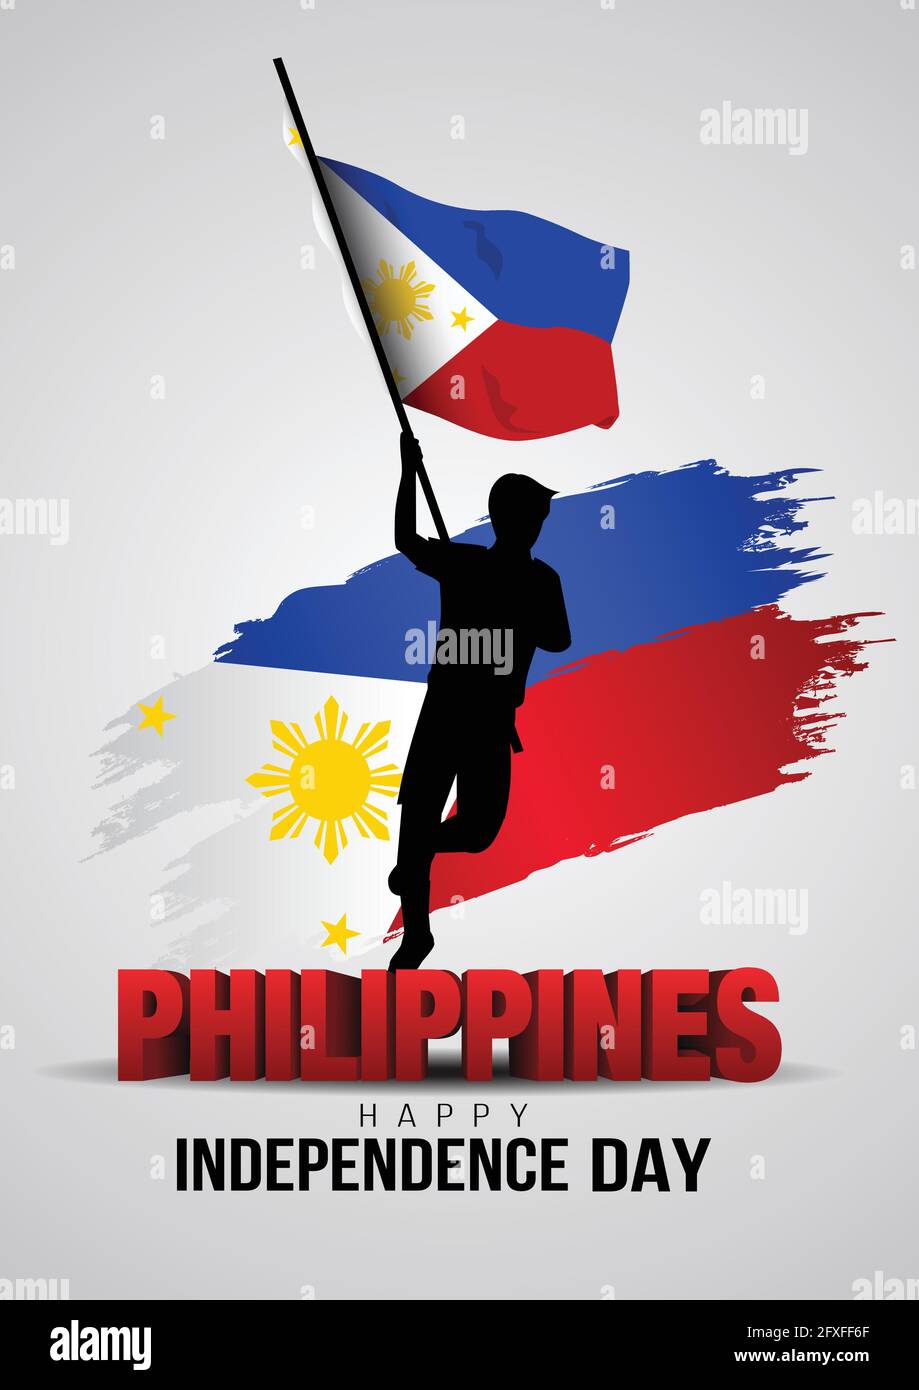 Happy Independence Day Philippines Vector Illustration Of Philippine Man With Flag Poster Banner Template Design Stock Vector Image Art Alamy